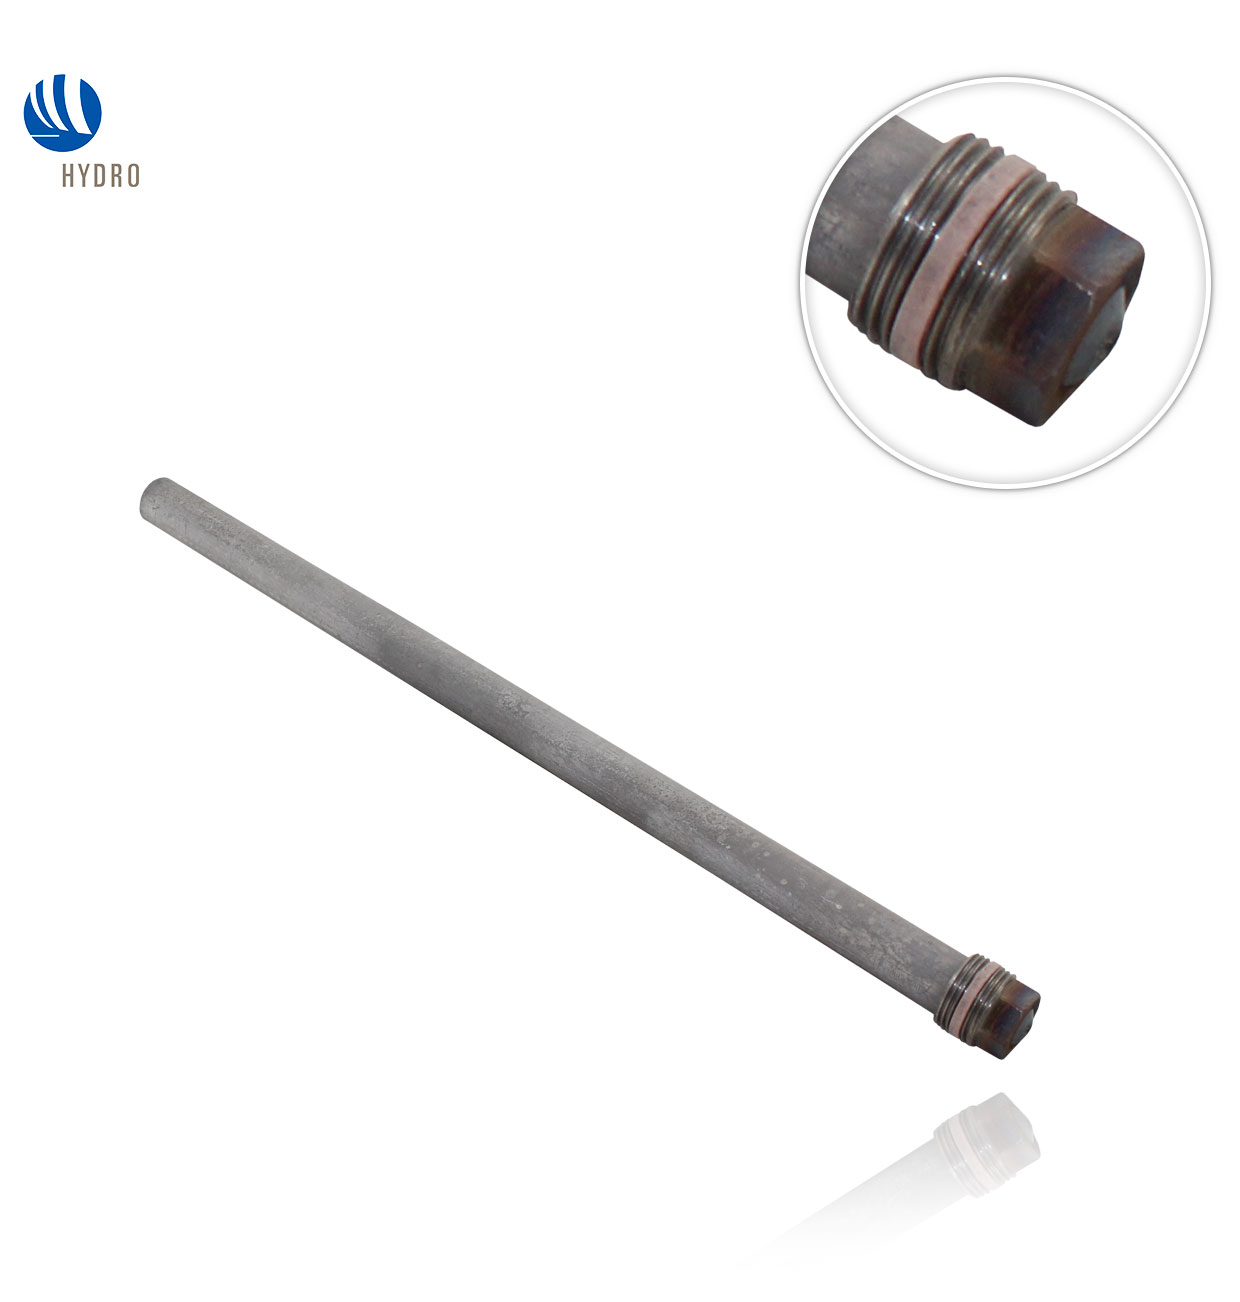 VAILLANT 26x505 G1 MAGNESIUM ANODE WITH PTFE